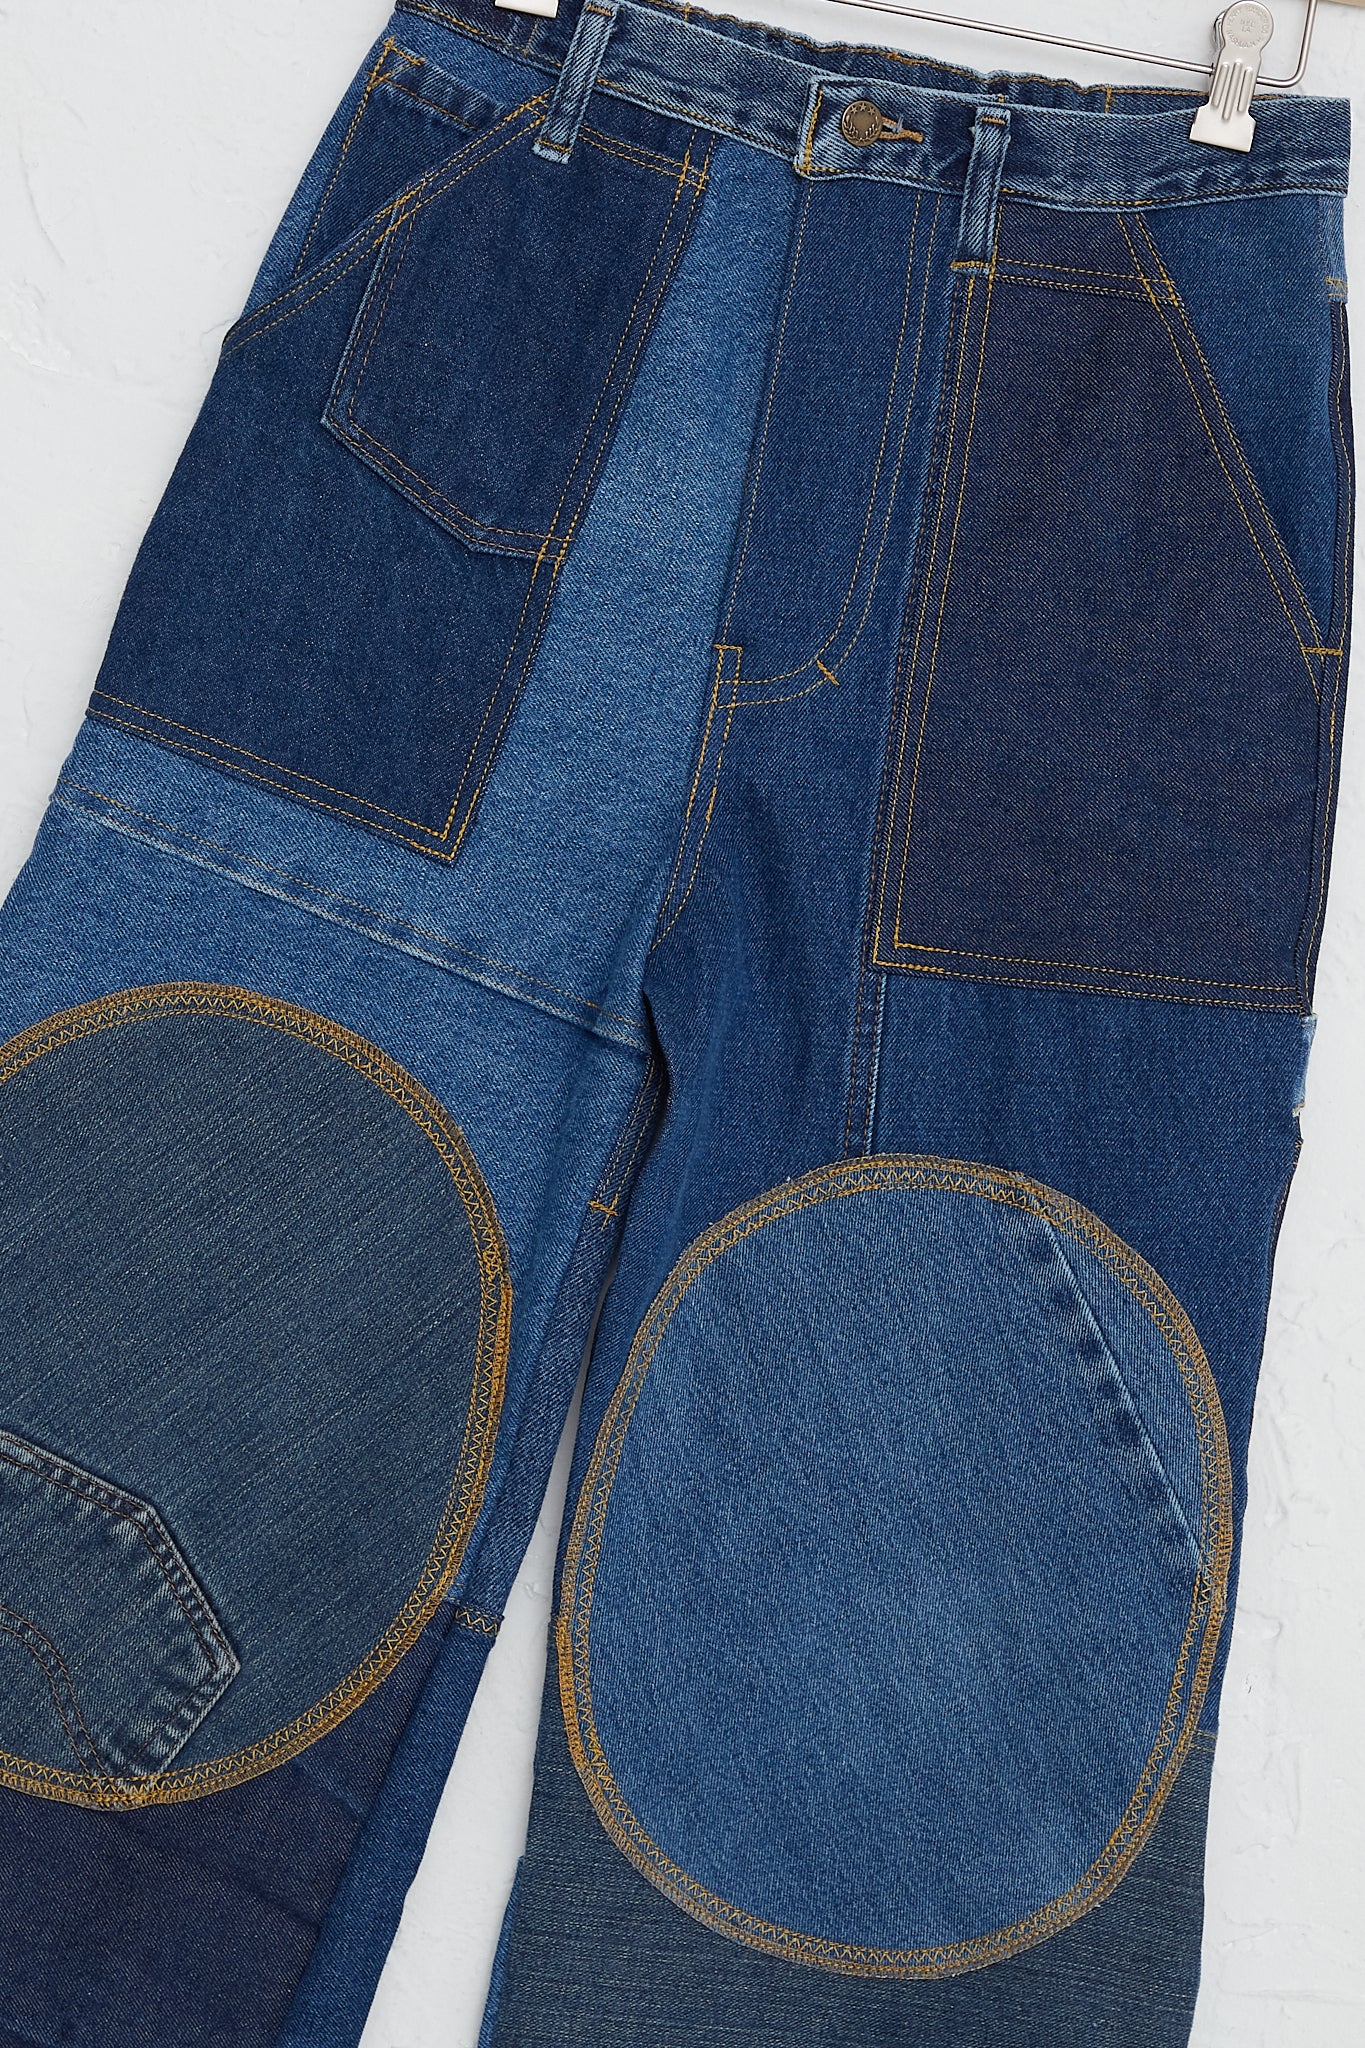 WildRootz - Reworked Jeans in Blue Variation B  - S front patch detail